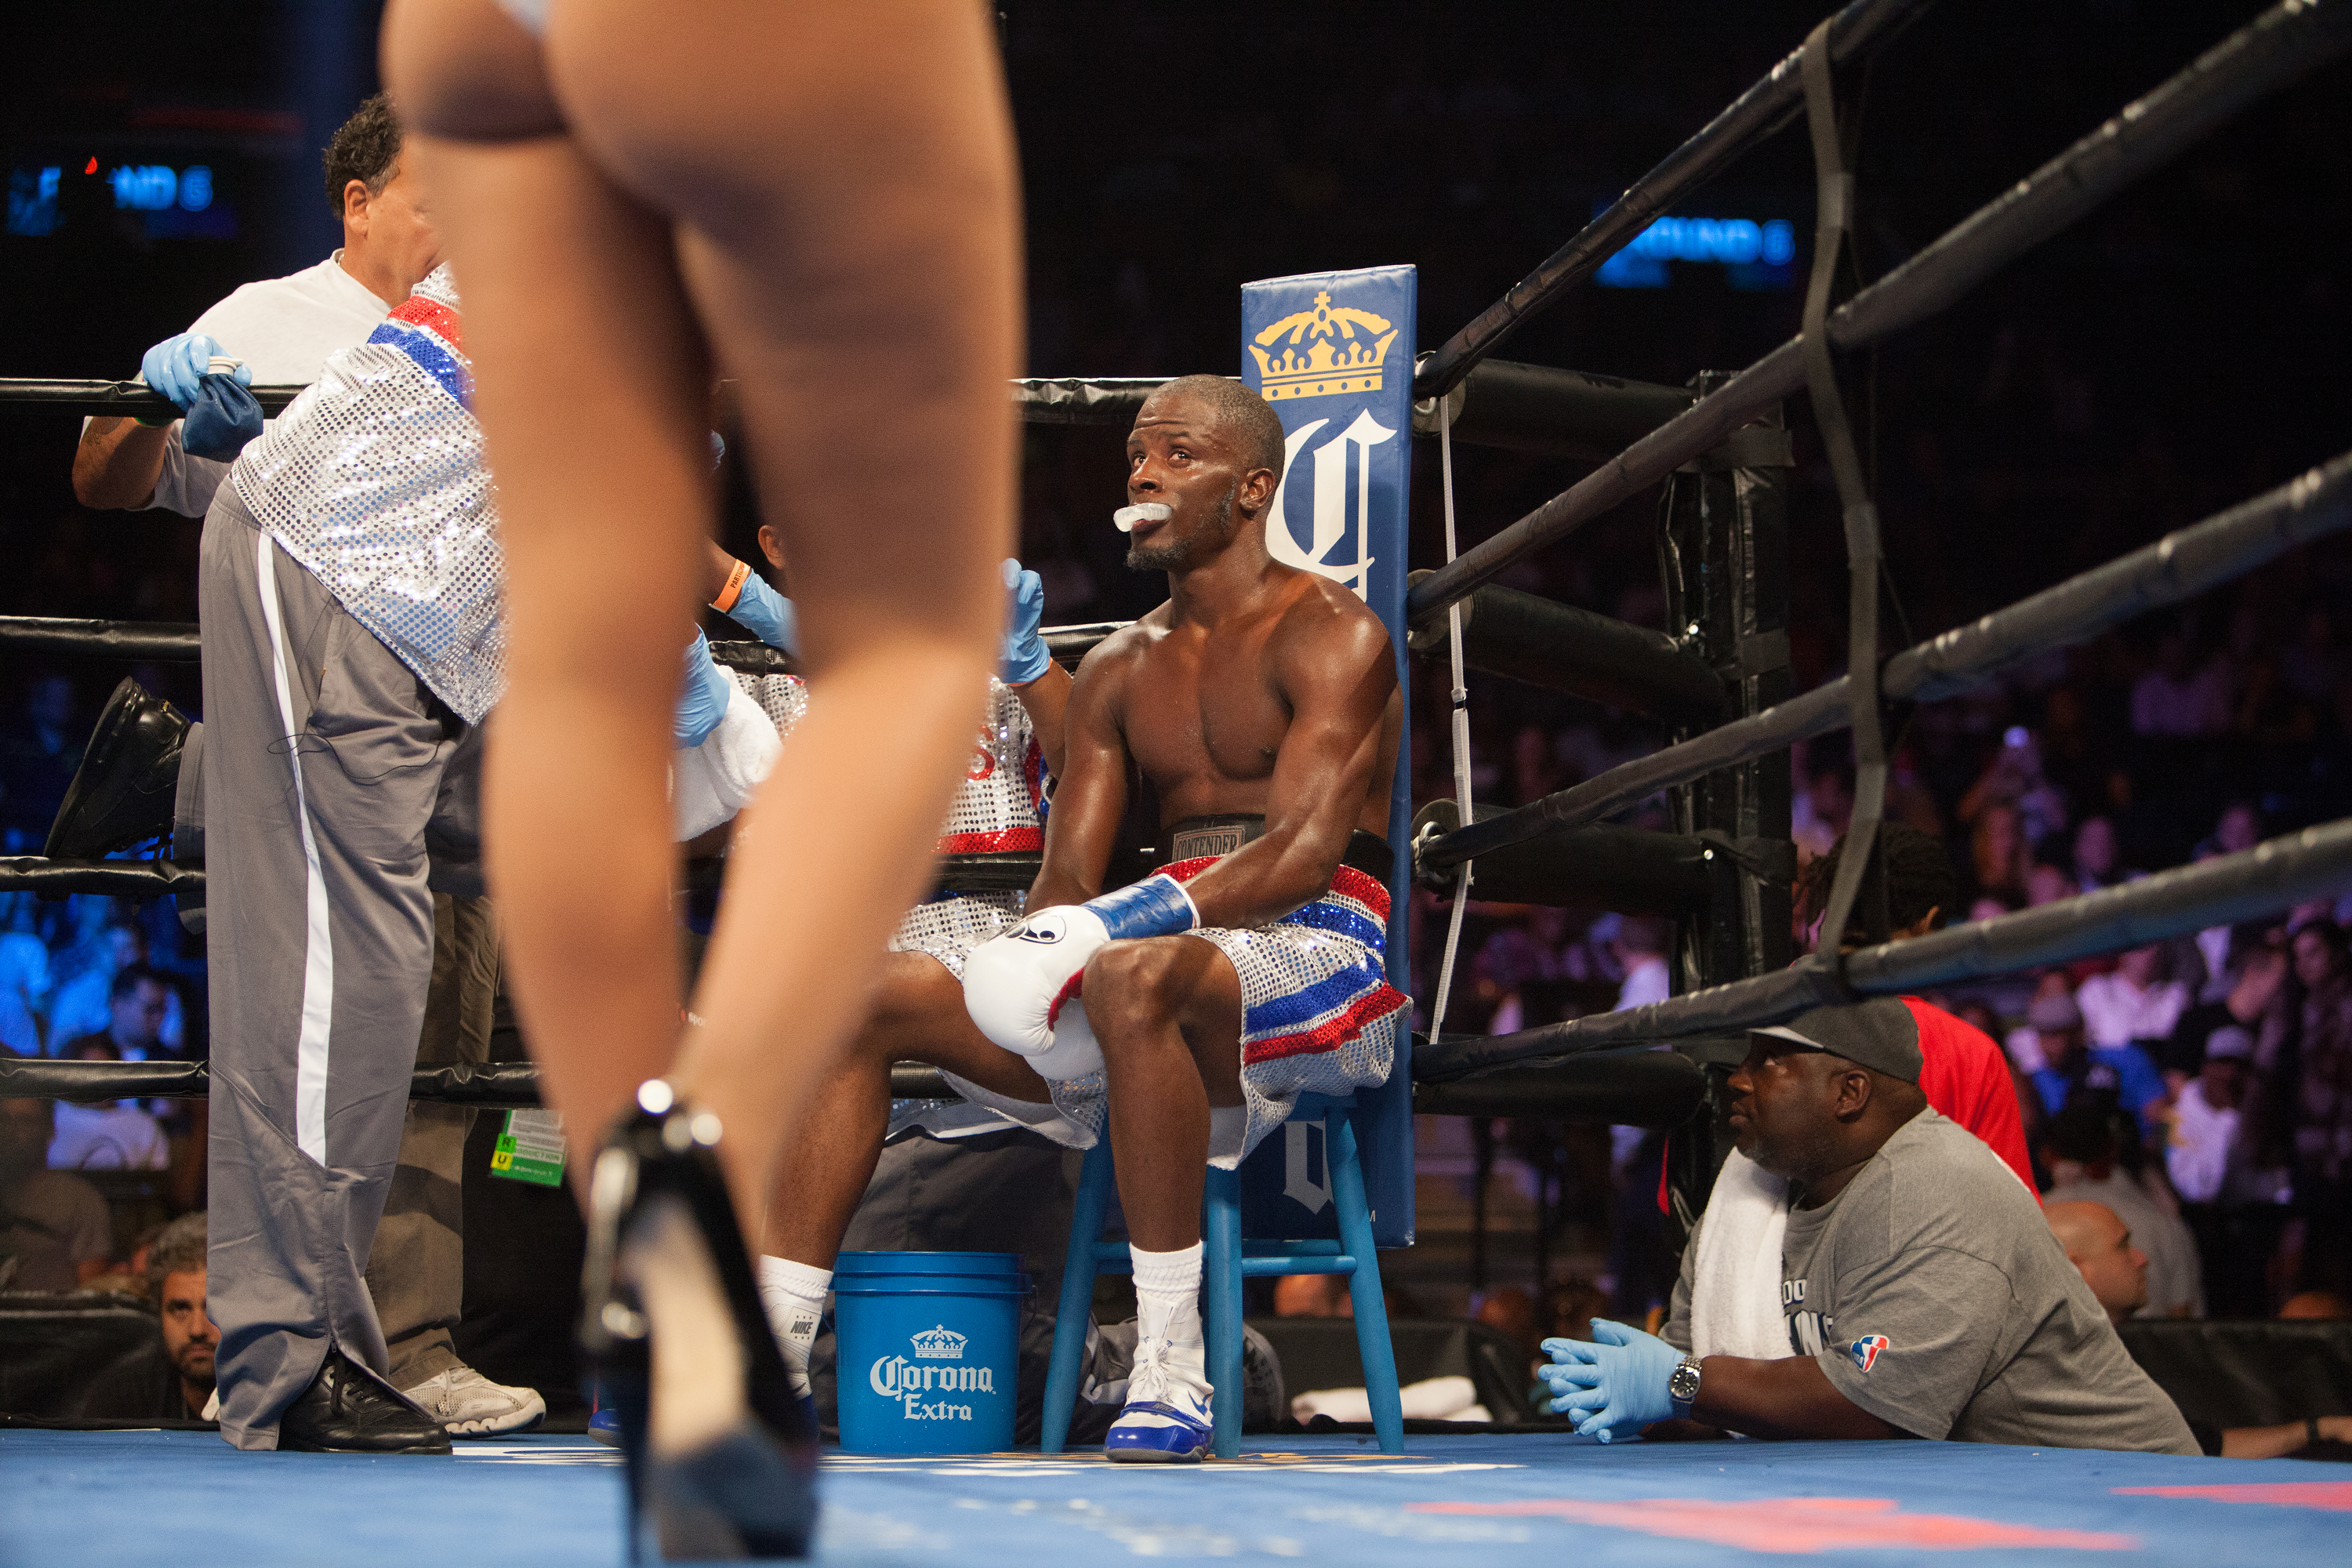 Tony Harrison looks on at the ring girl in between rounds at the Barclays Arena in Brooklyn, N.Y. on July 31, 2016.